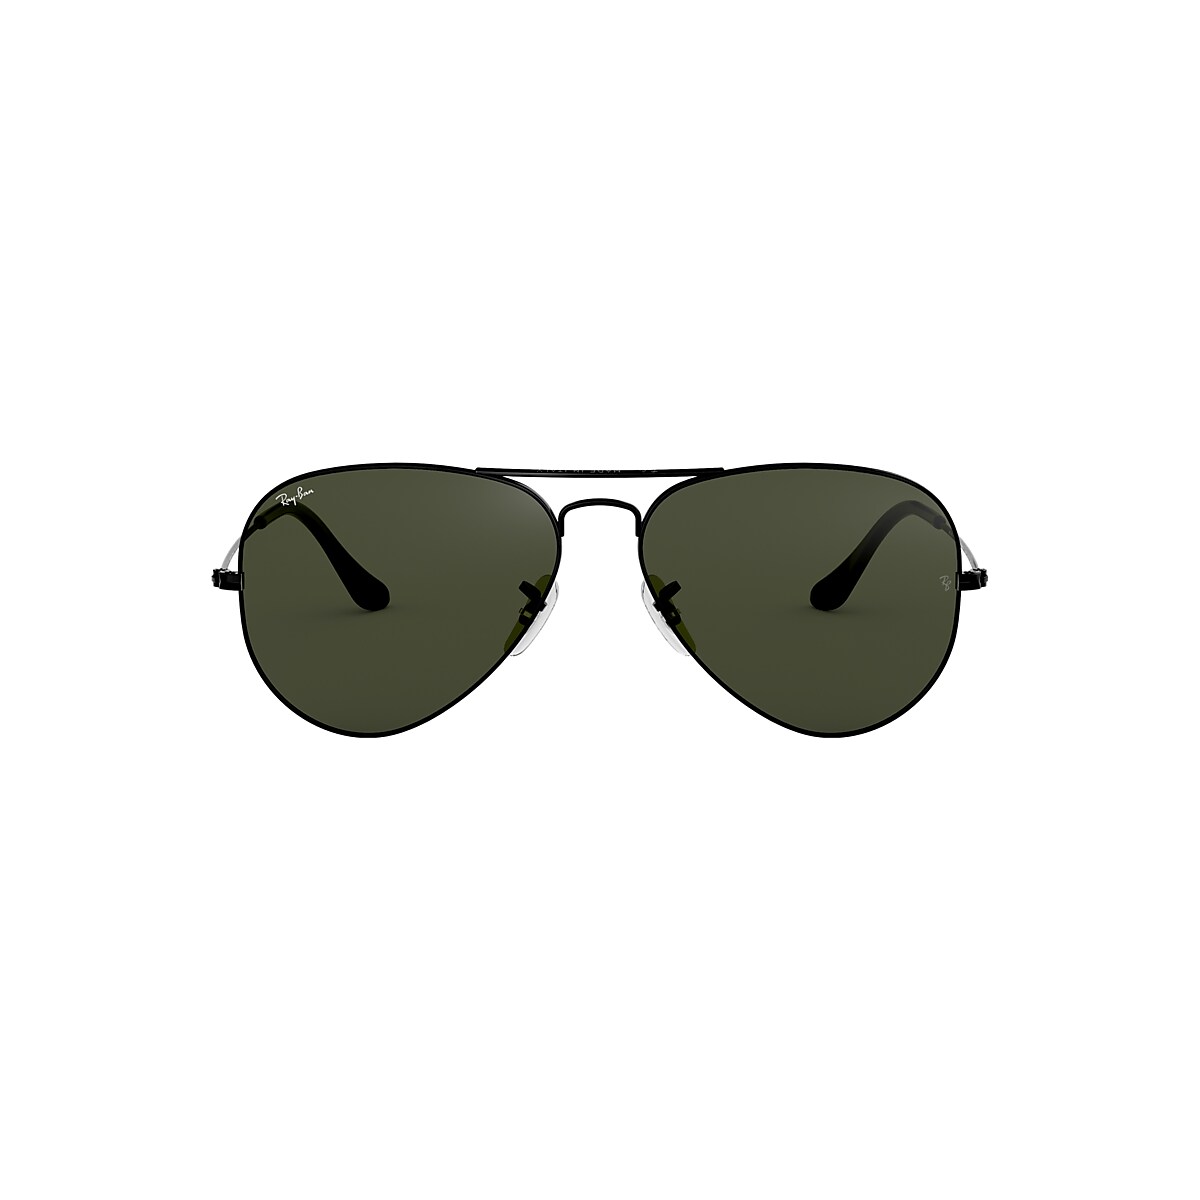 Frente al mar Expansión convergencia AVIATOR CLASSIC Sunglasses in Black and Green - RB3025 | Ray-Ban® US